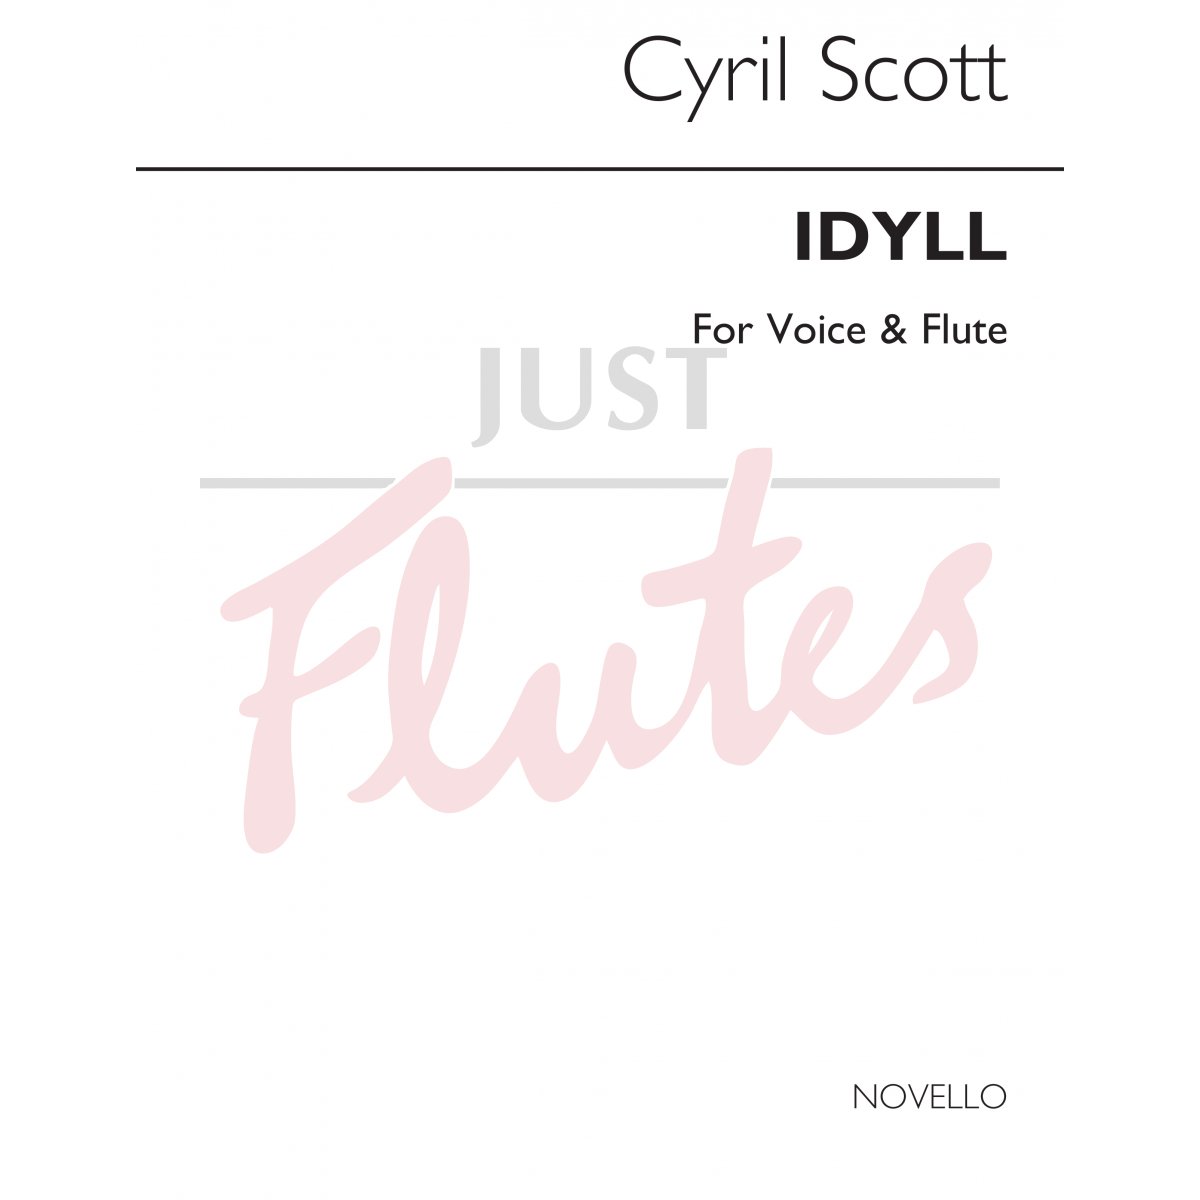 Idyll for Voice and Flute